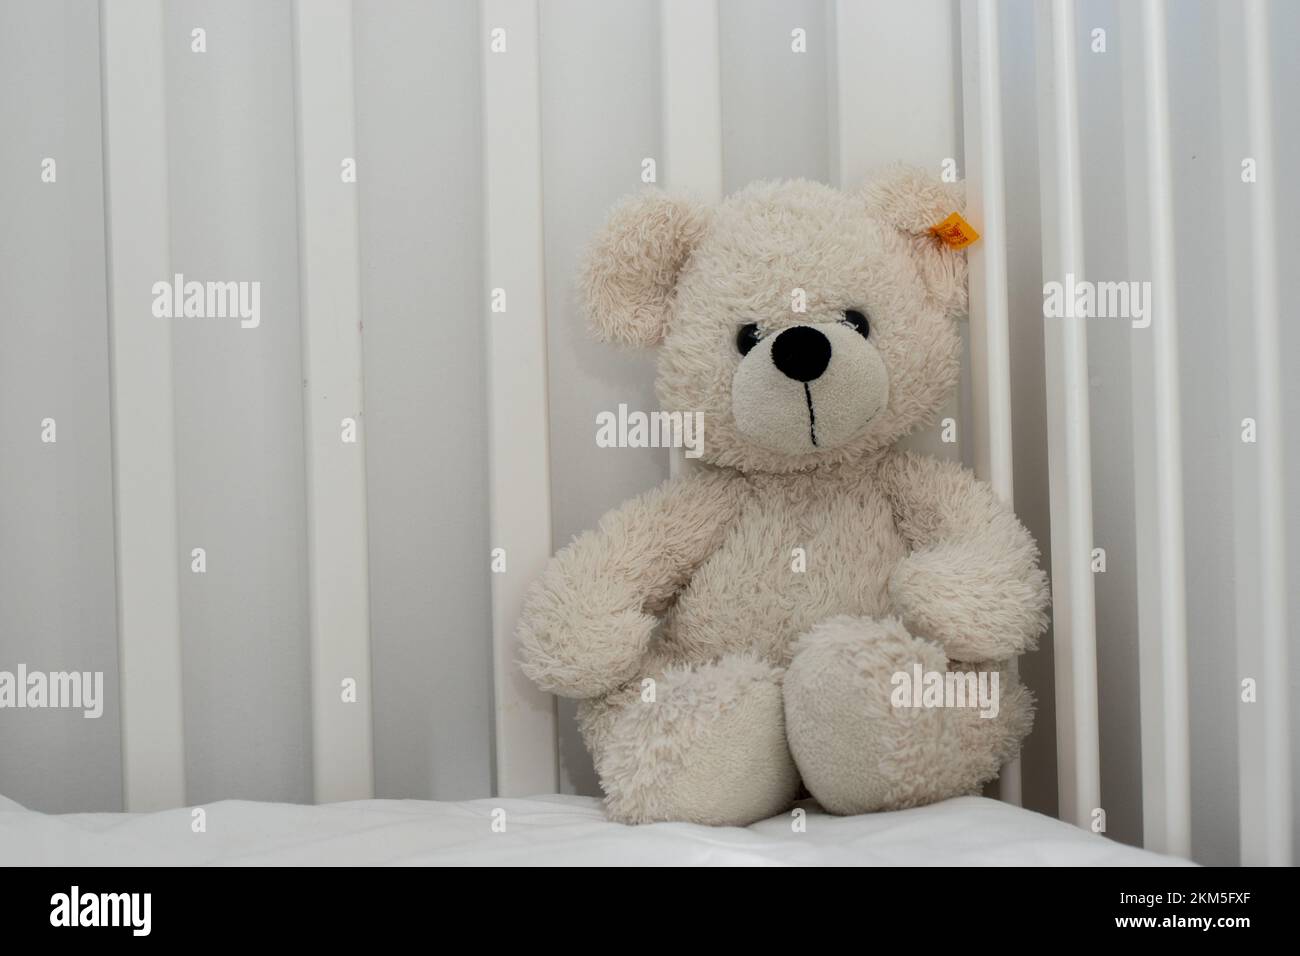 White teddy bear polar bear cuddly snuggly toy in baby cot child's bed monochrome neutral colours black and white Stock Photo